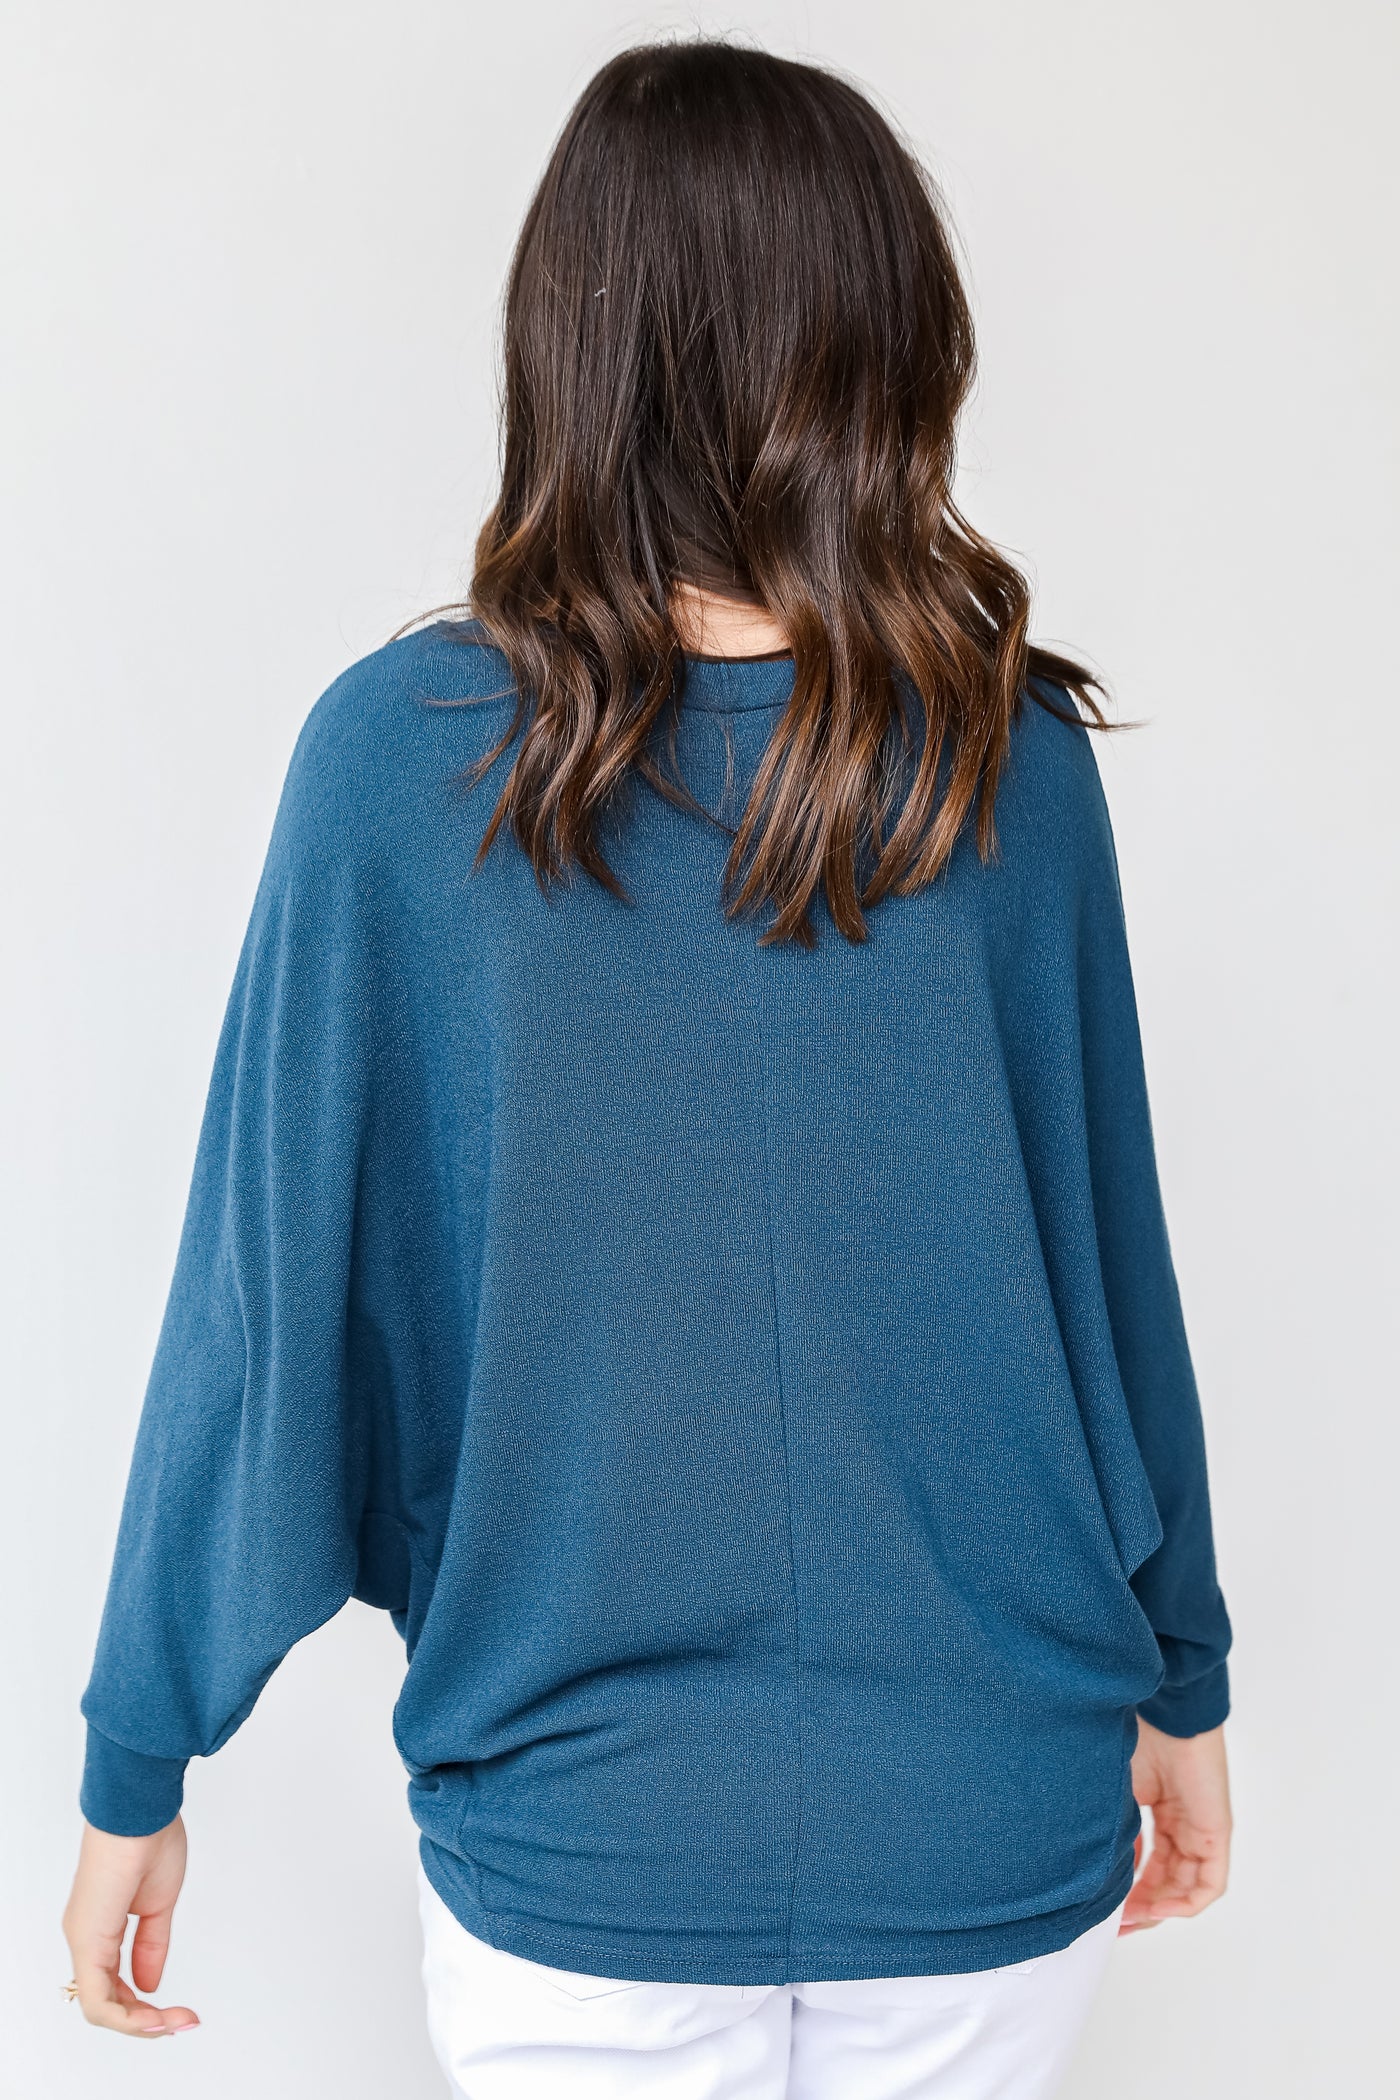 Knit Top in teal back view